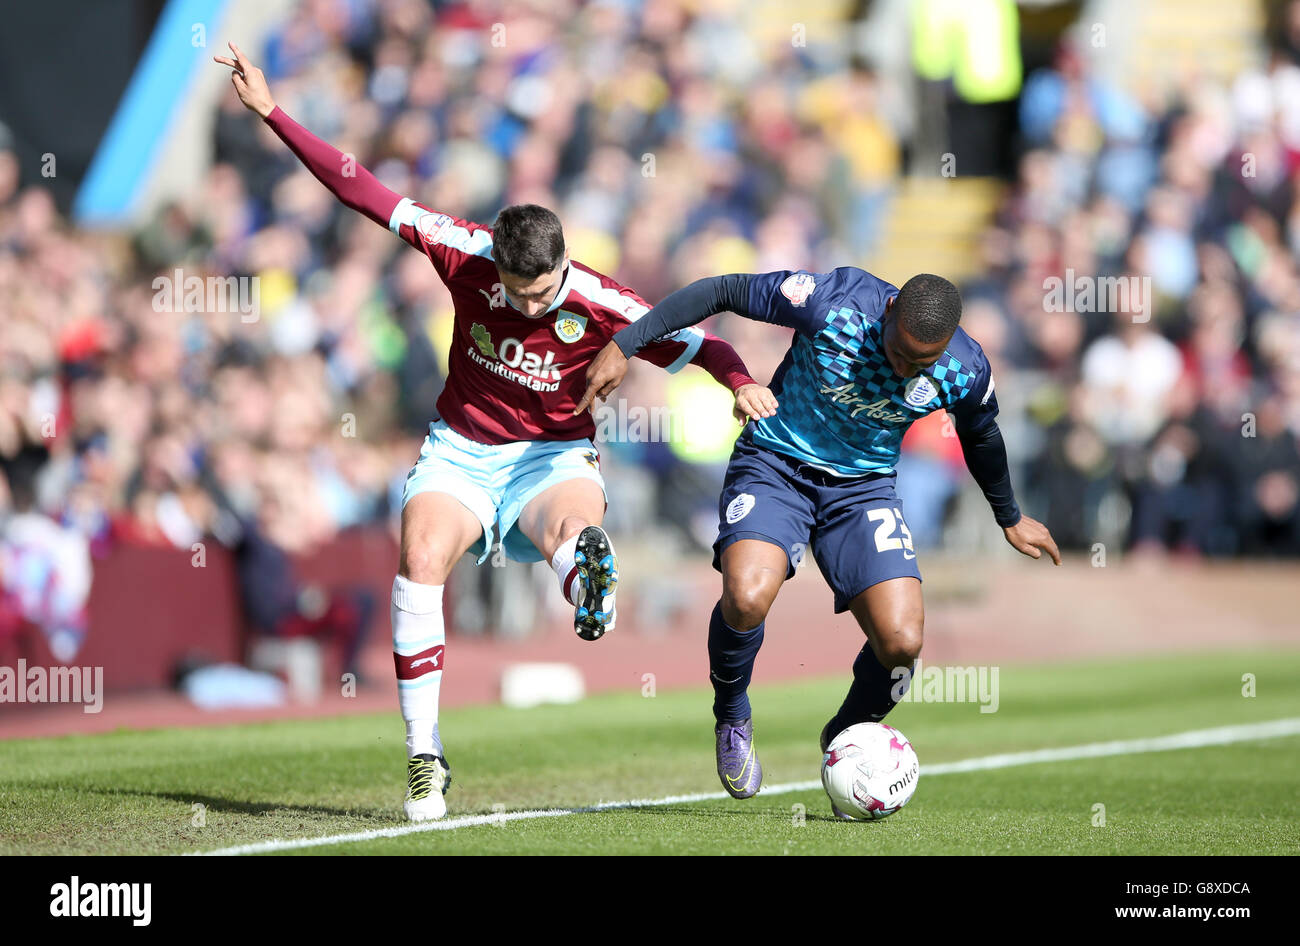 Burnley's Matthew Lowton (left) and Queens Park Rangers' Junior Hoilett battle for the ball during the Sky Bet Championship match at Turf Moor, Burnley. PRESS ASSOCIATION Photo. Picture date: Monday May 2, 2016. See PA story SOCCER Burnley. Photo credit should read: Tim Goode/PA Wire. Stock Photo